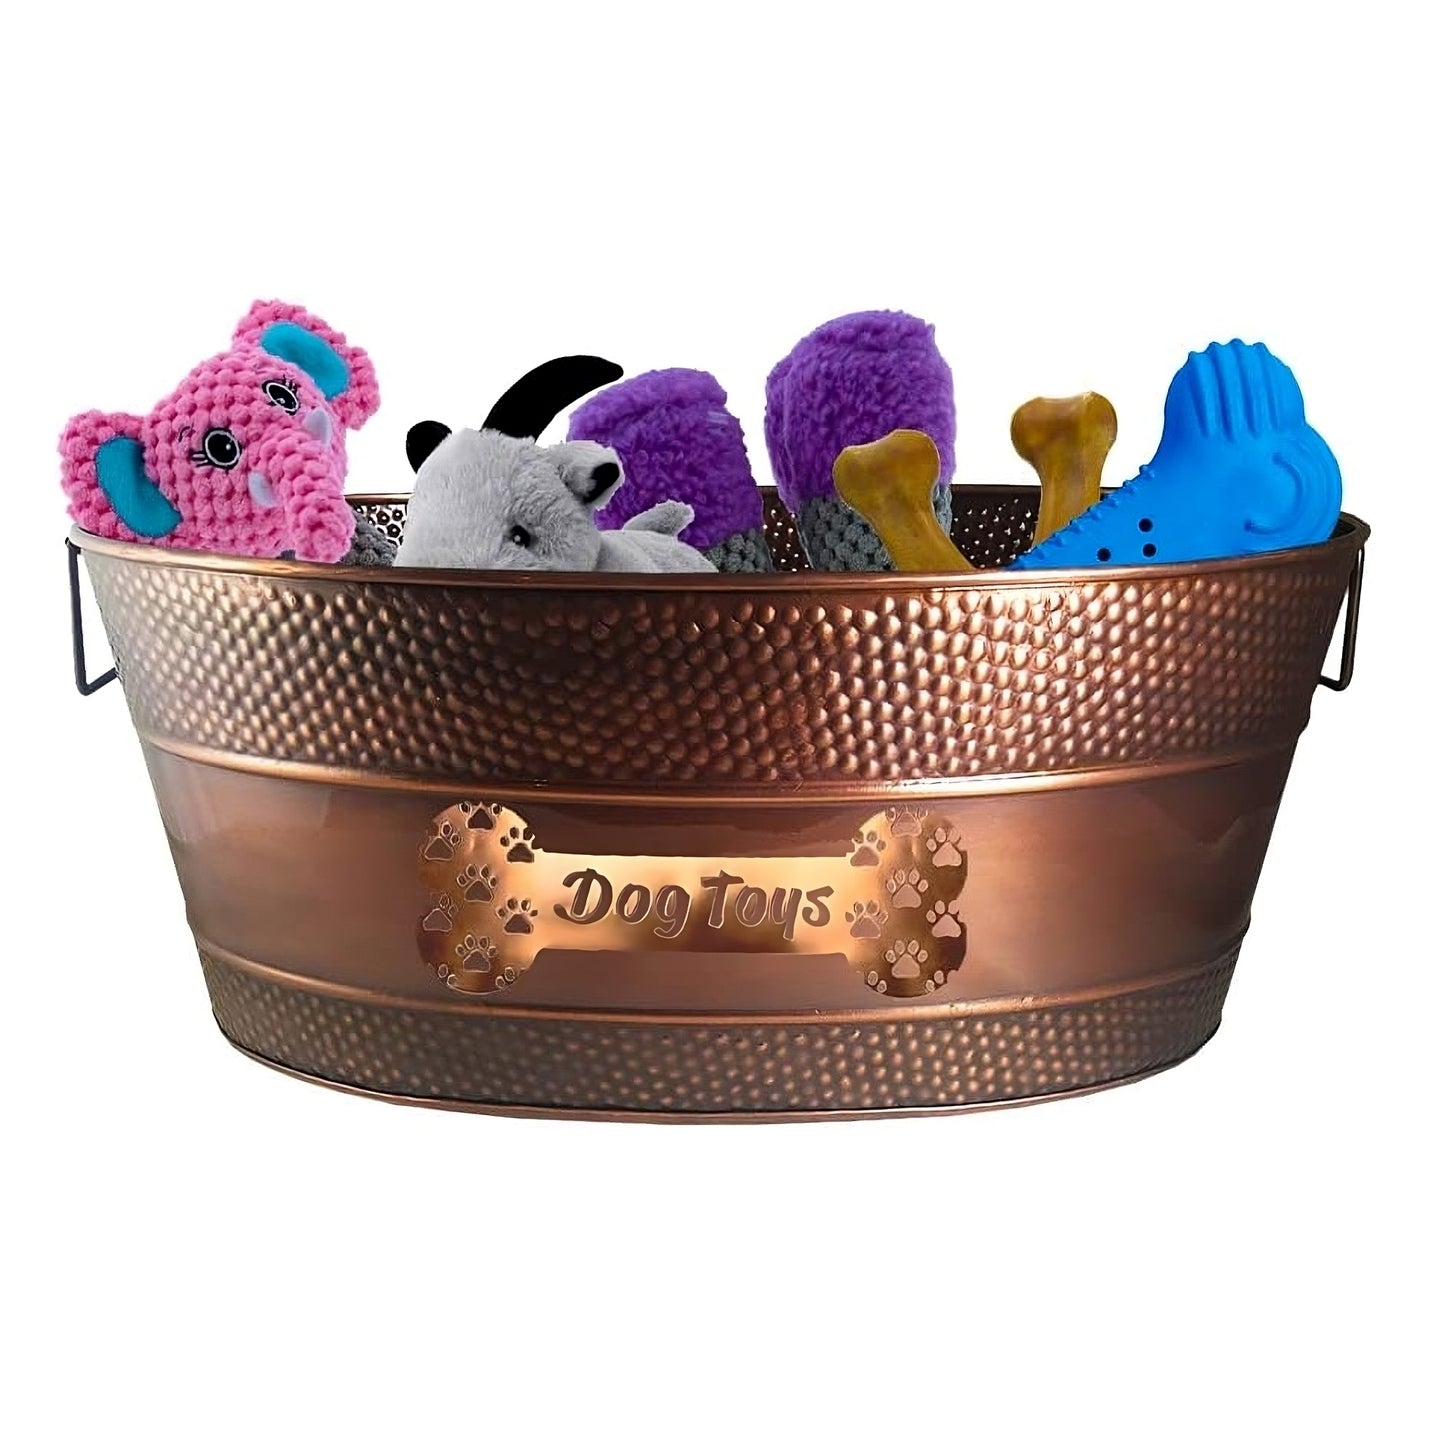 Large personalized dog toy basket with fast shipping and delivery.